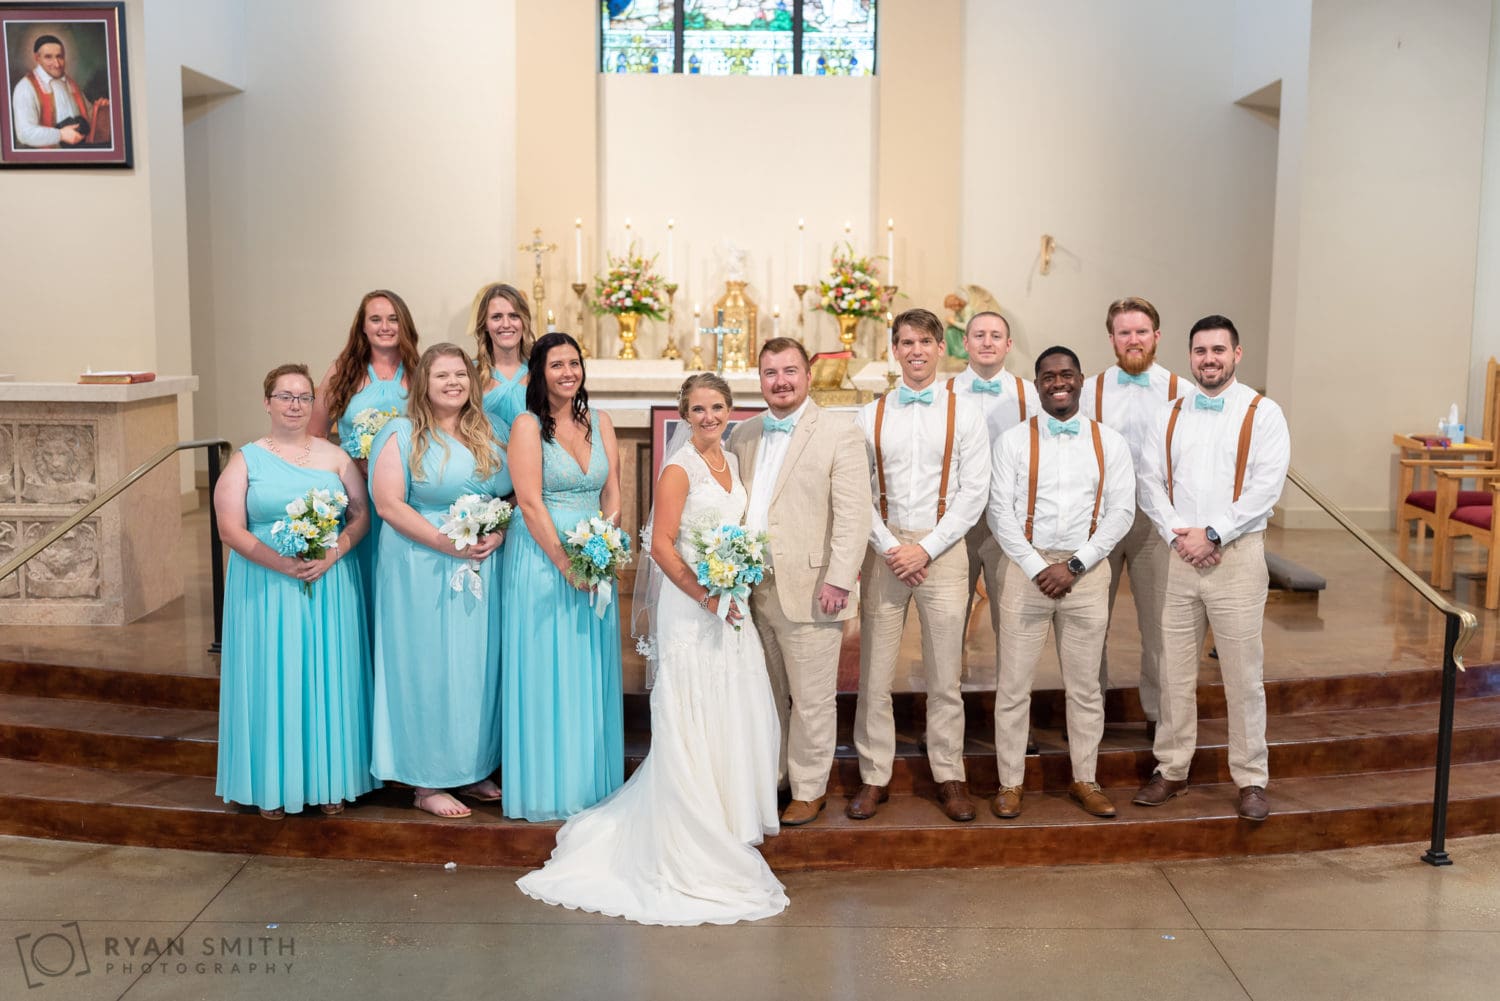 Bridal party after the ceremony - St. Michael's - Garden City, SC